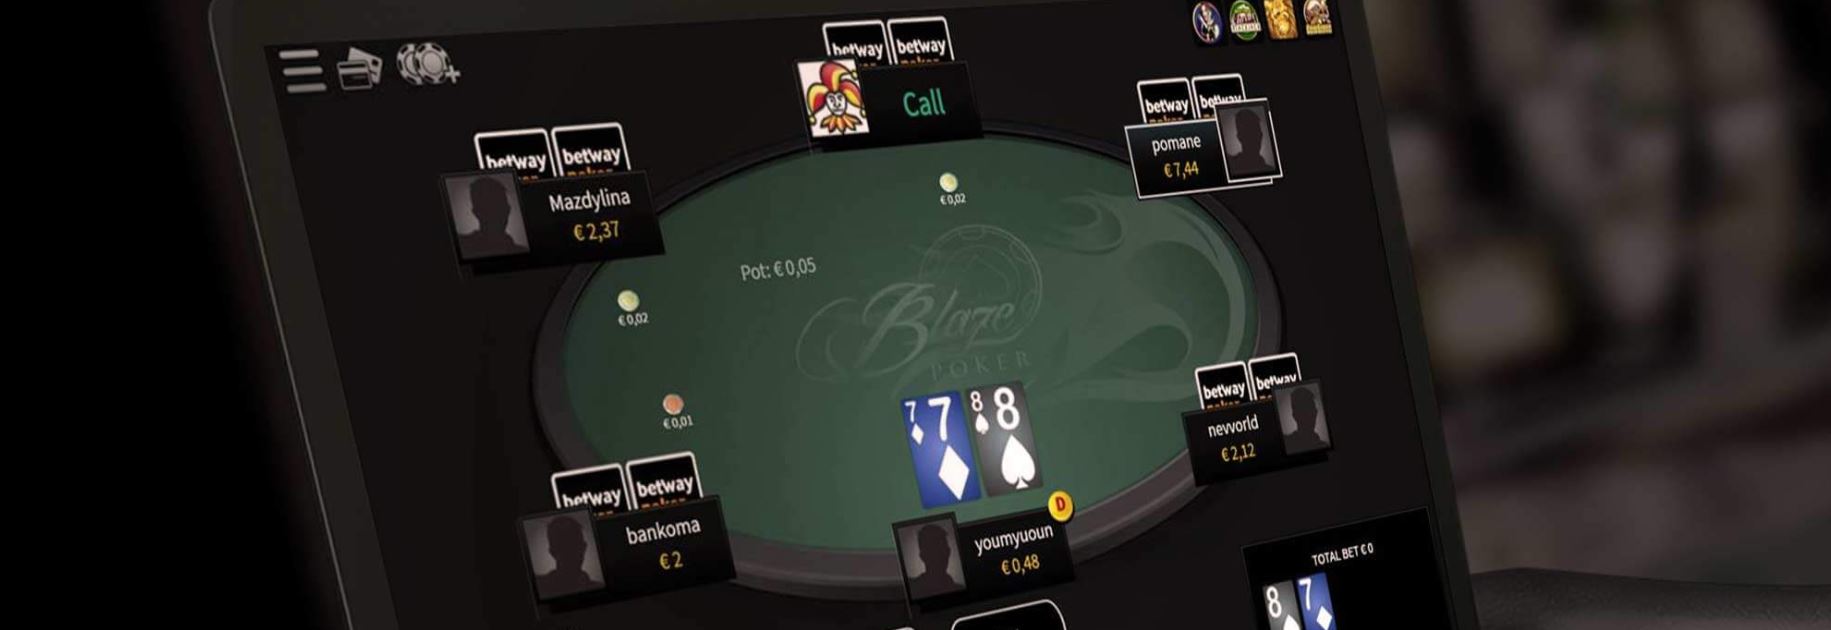 Virtually all online casinos have poker in their catalog.